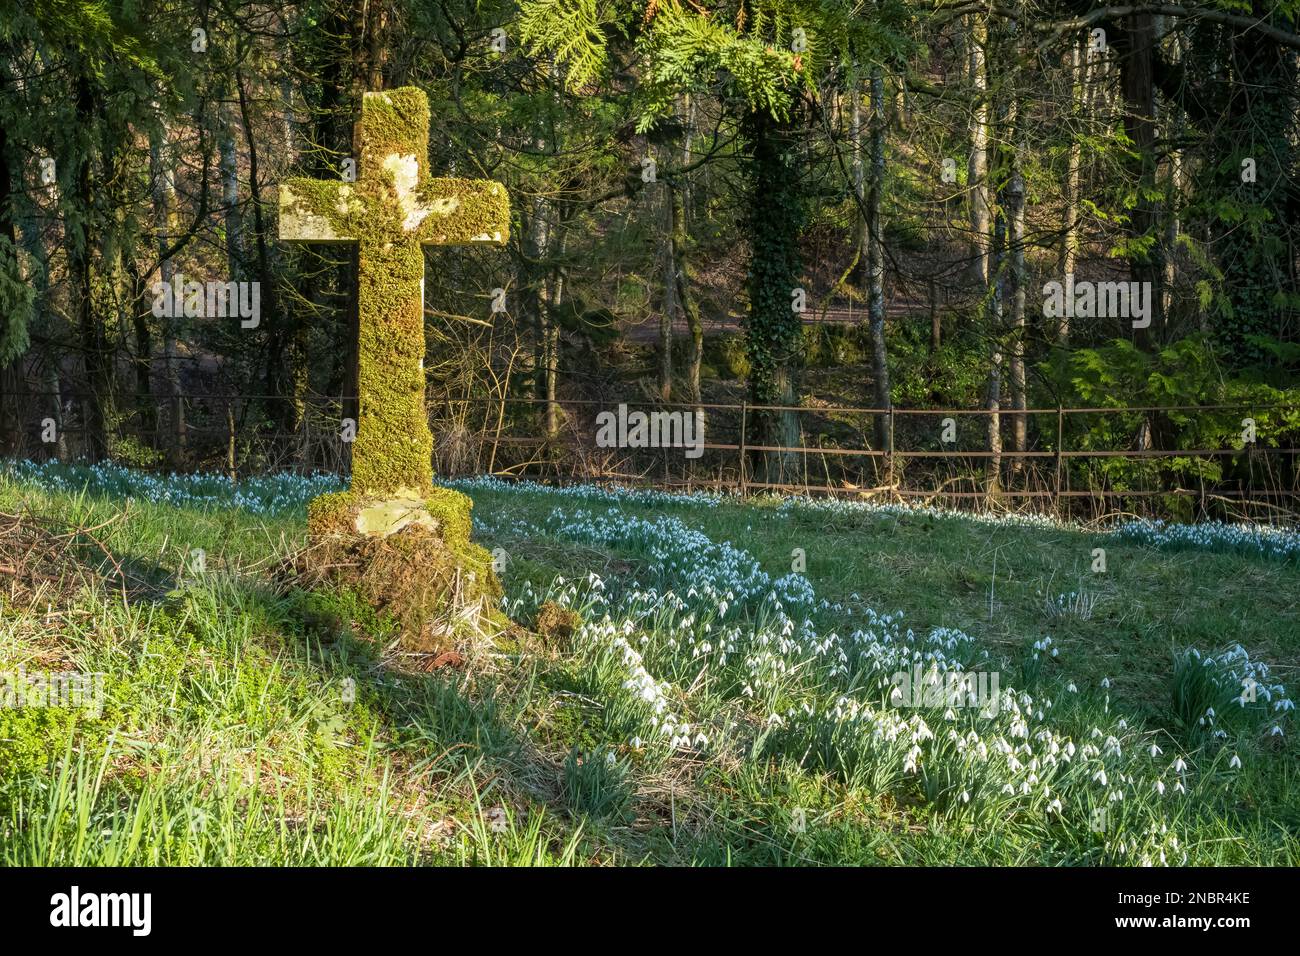 Snowdrops and Winter warmth in a rural churchyard, Askham St Peter, Cumbria, UK Stock Photo